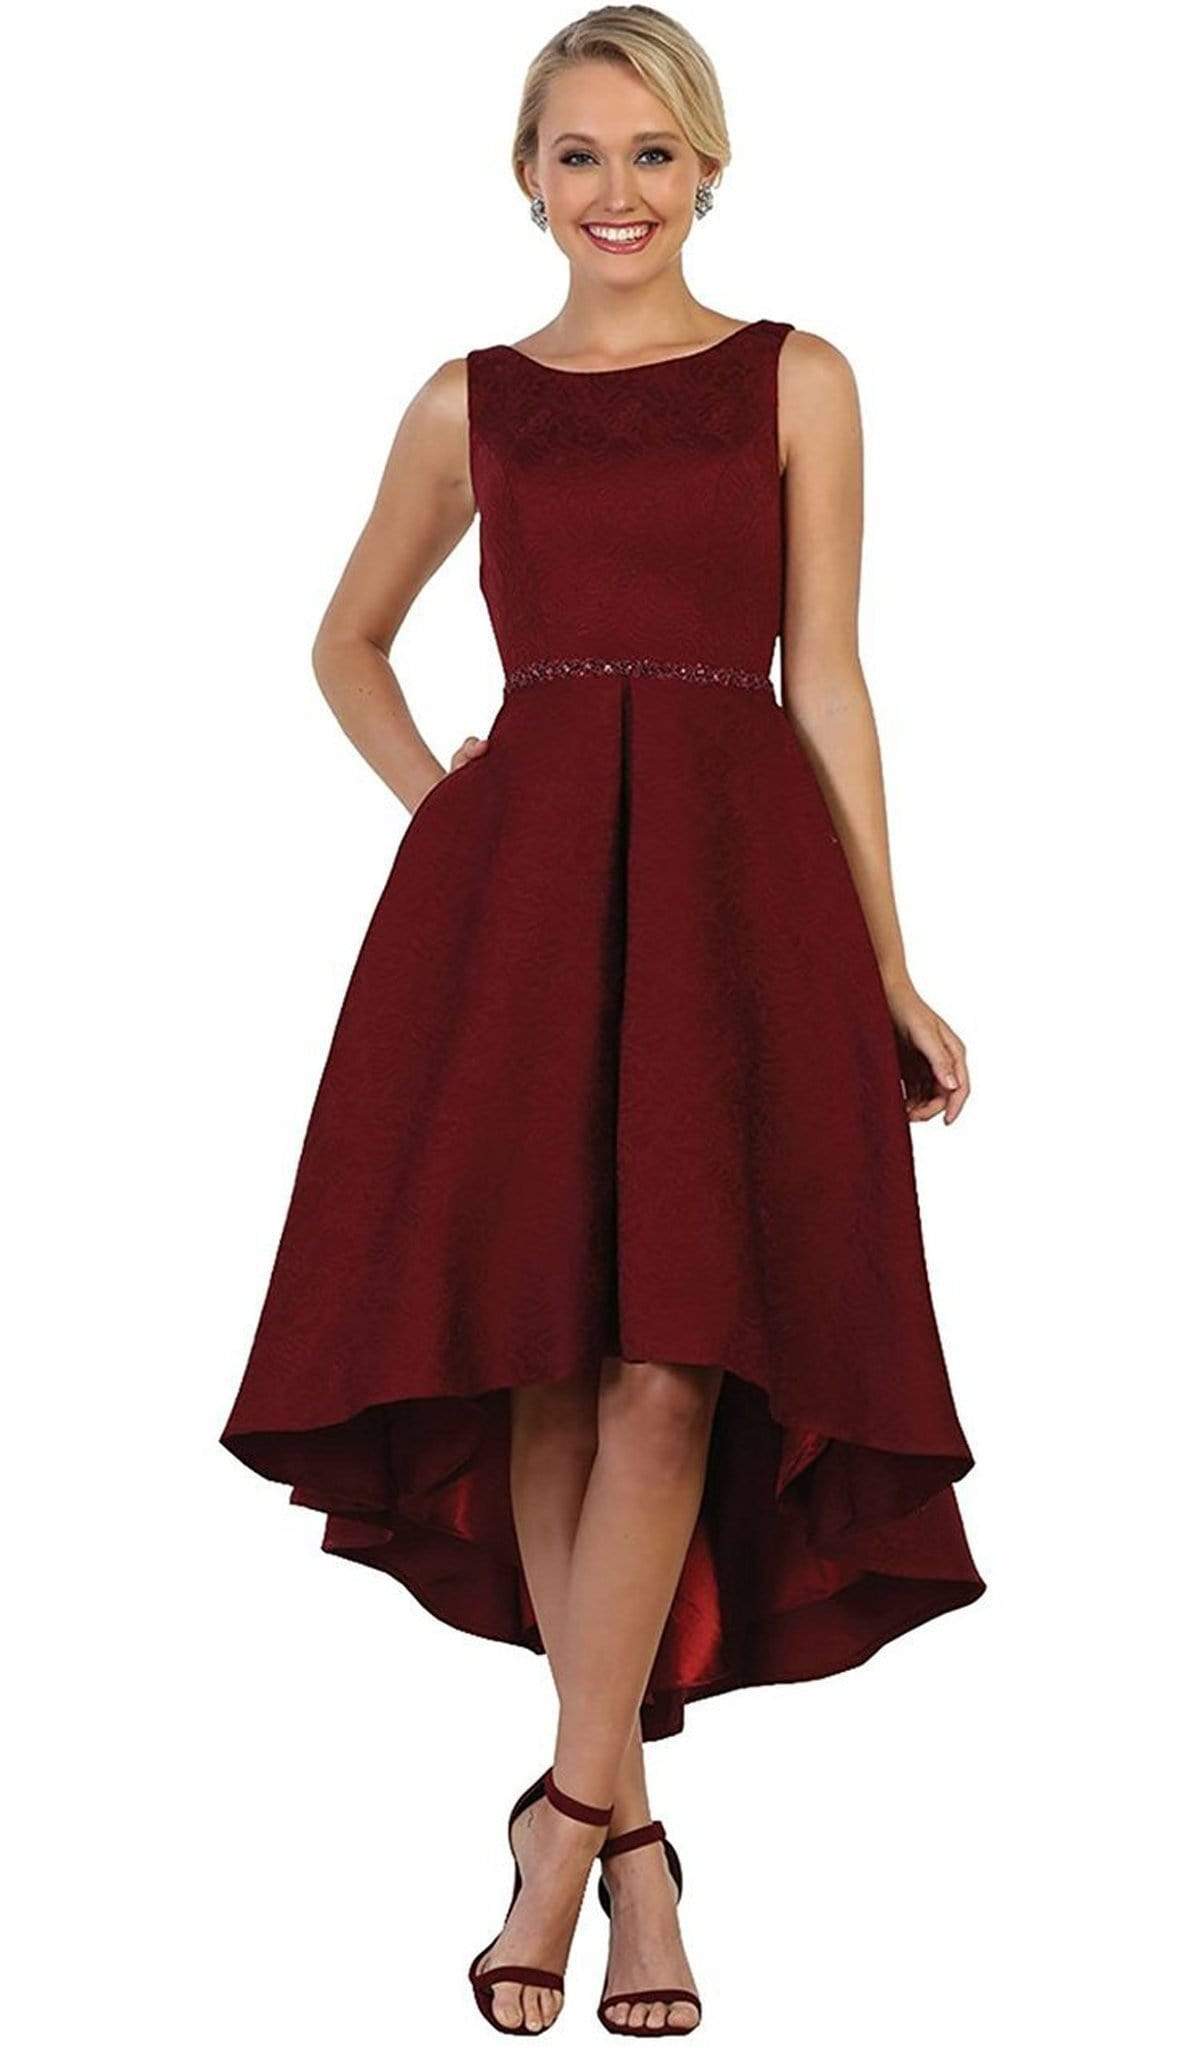 May Queen - RQ7604 Embellished Bateau High Low A-line Cocktail Dress Special Occasion Dress 4 / Burgundy